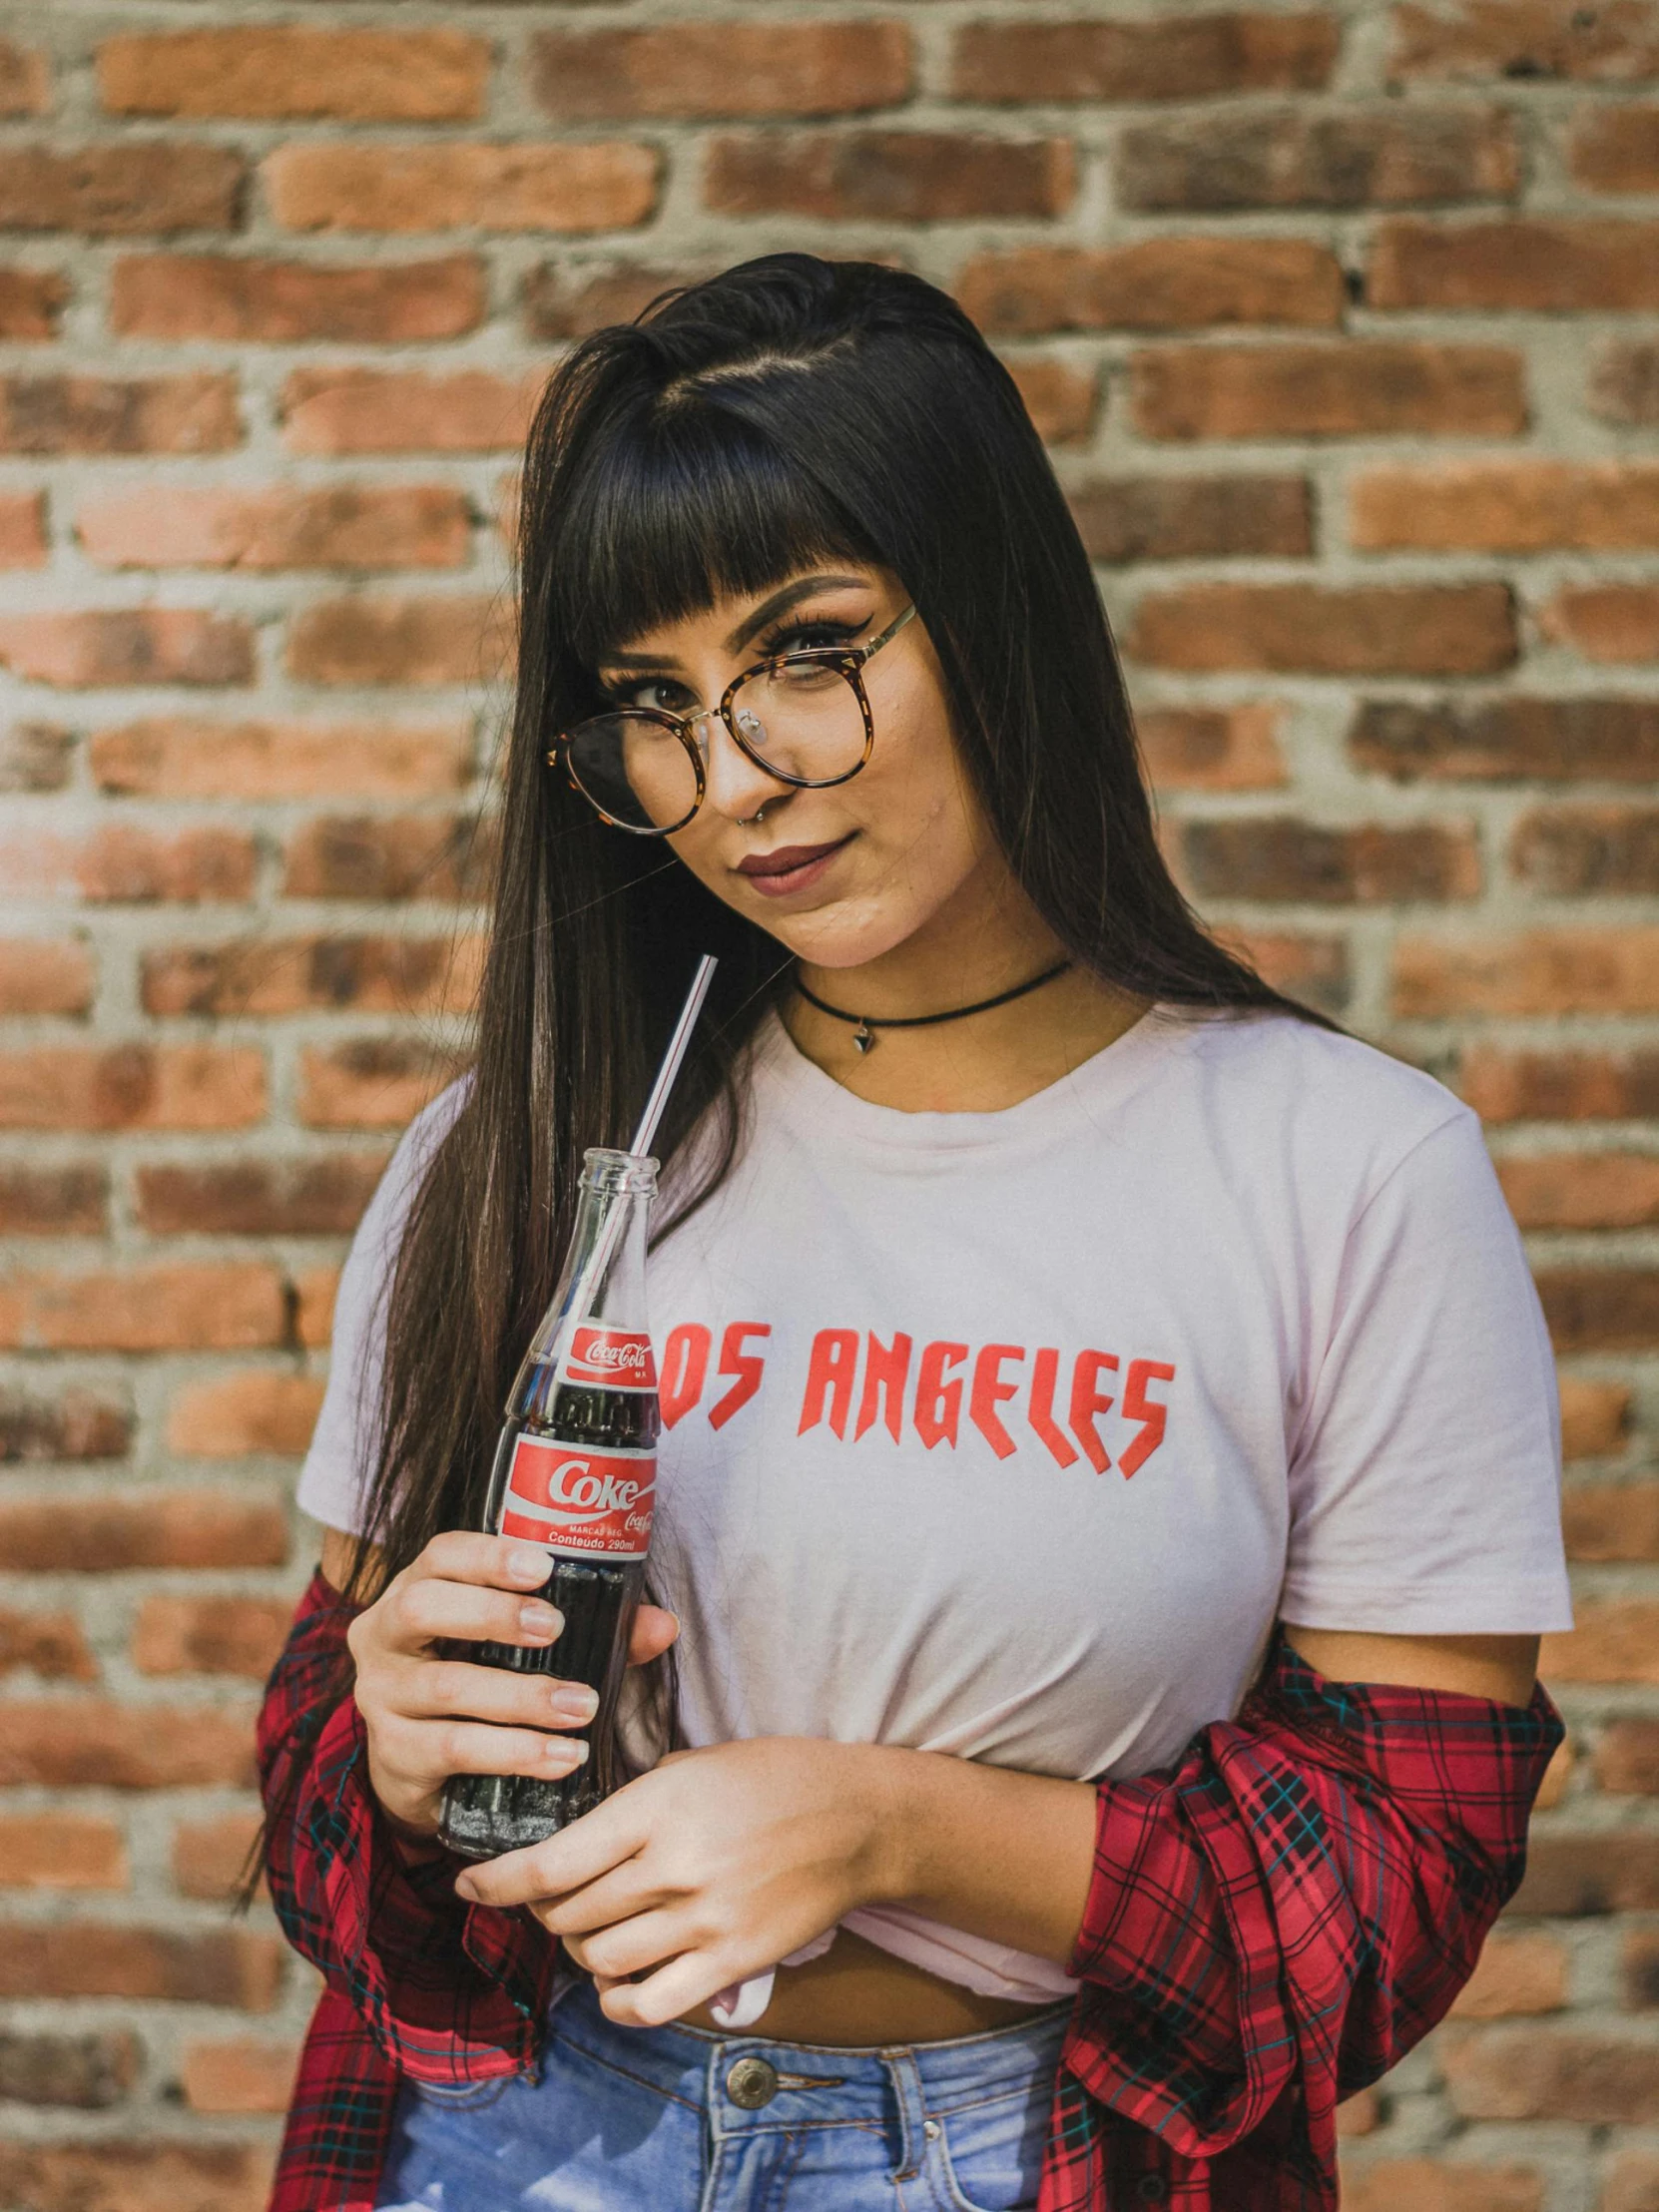 a woman standing in front of a brick wall holding a coke, pexels contest winner, los angelos, wearing a t-shirt, nerds, profile image